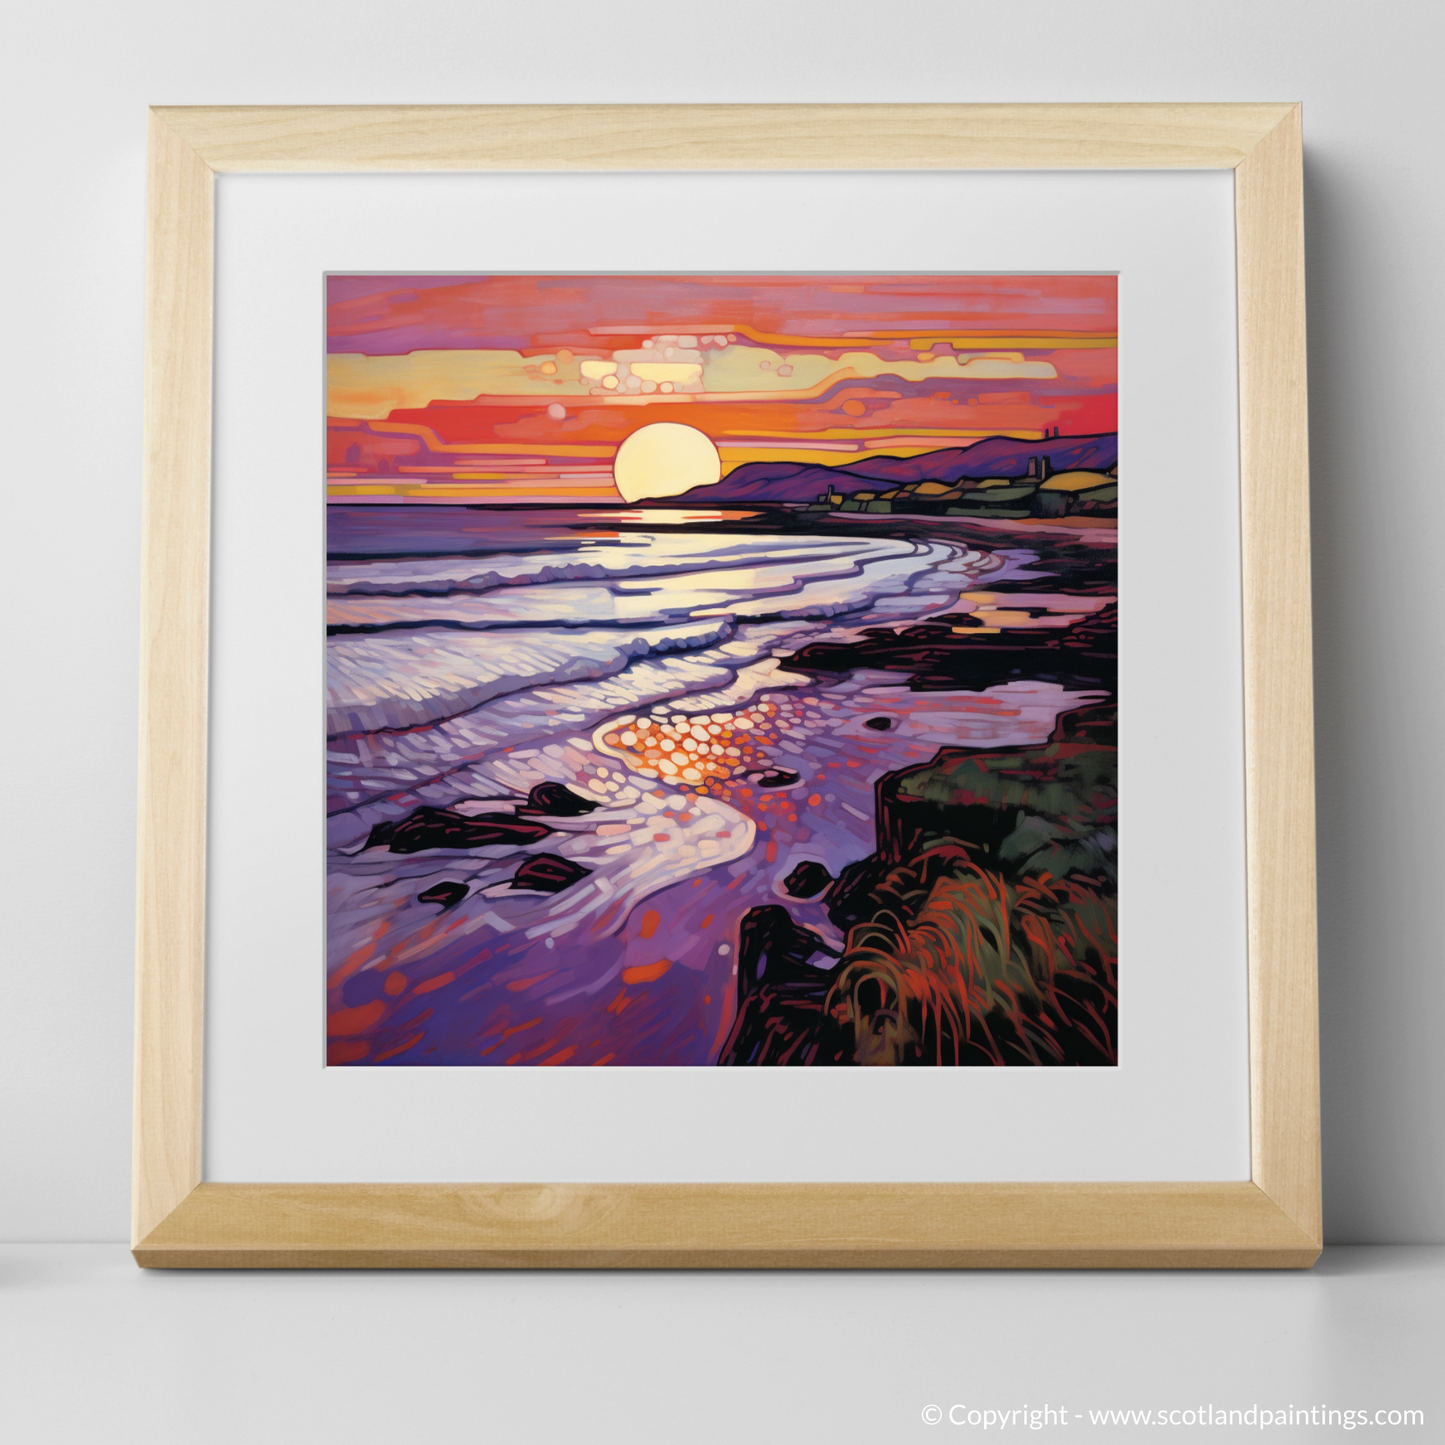 Coldingham Bay at Sunset: An Art Nouveau Ode to Tranquility